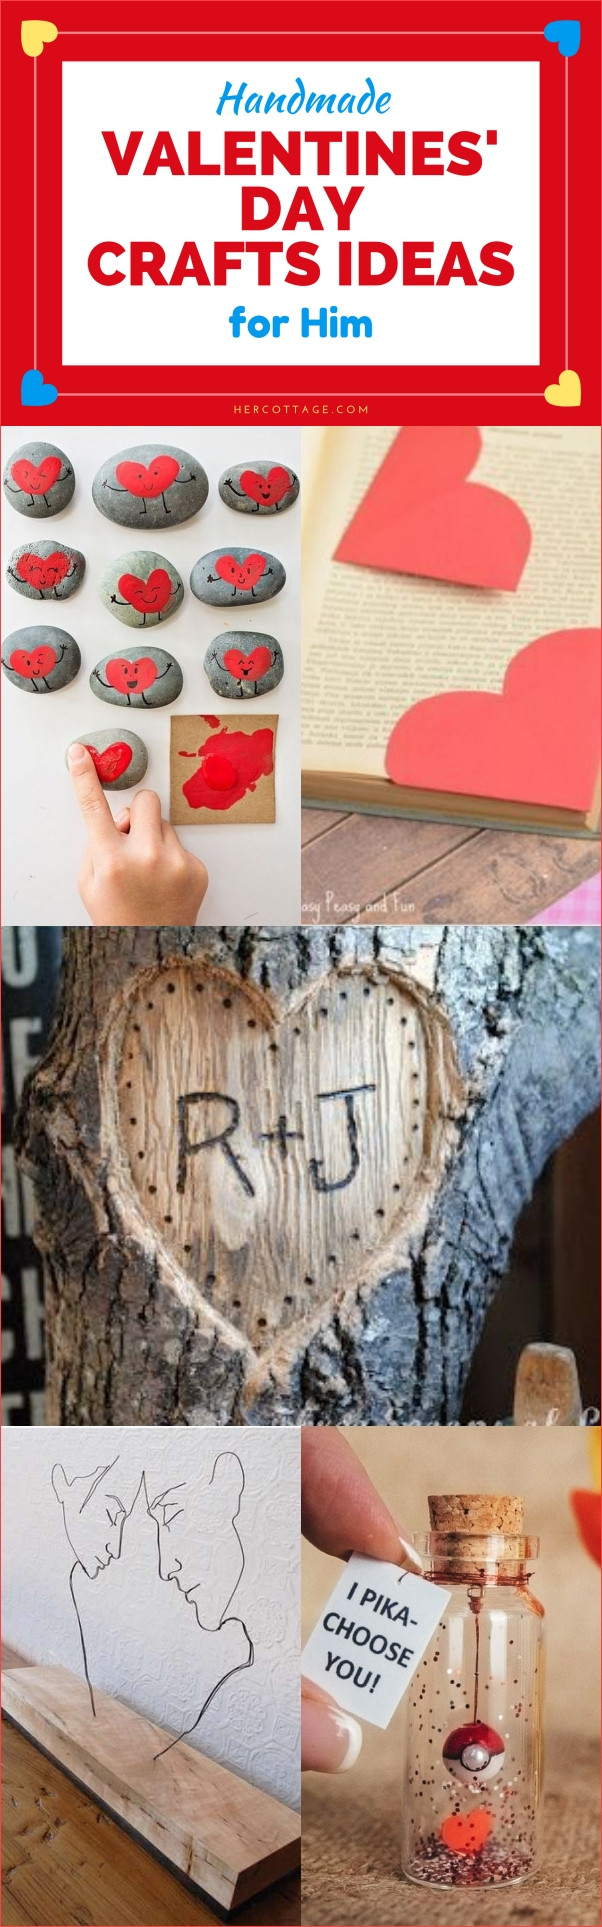 Special Valentines Day Ideas For Him
 32 Handmade Valentines Day Crafts Ideas for Him HERCOTTAGE